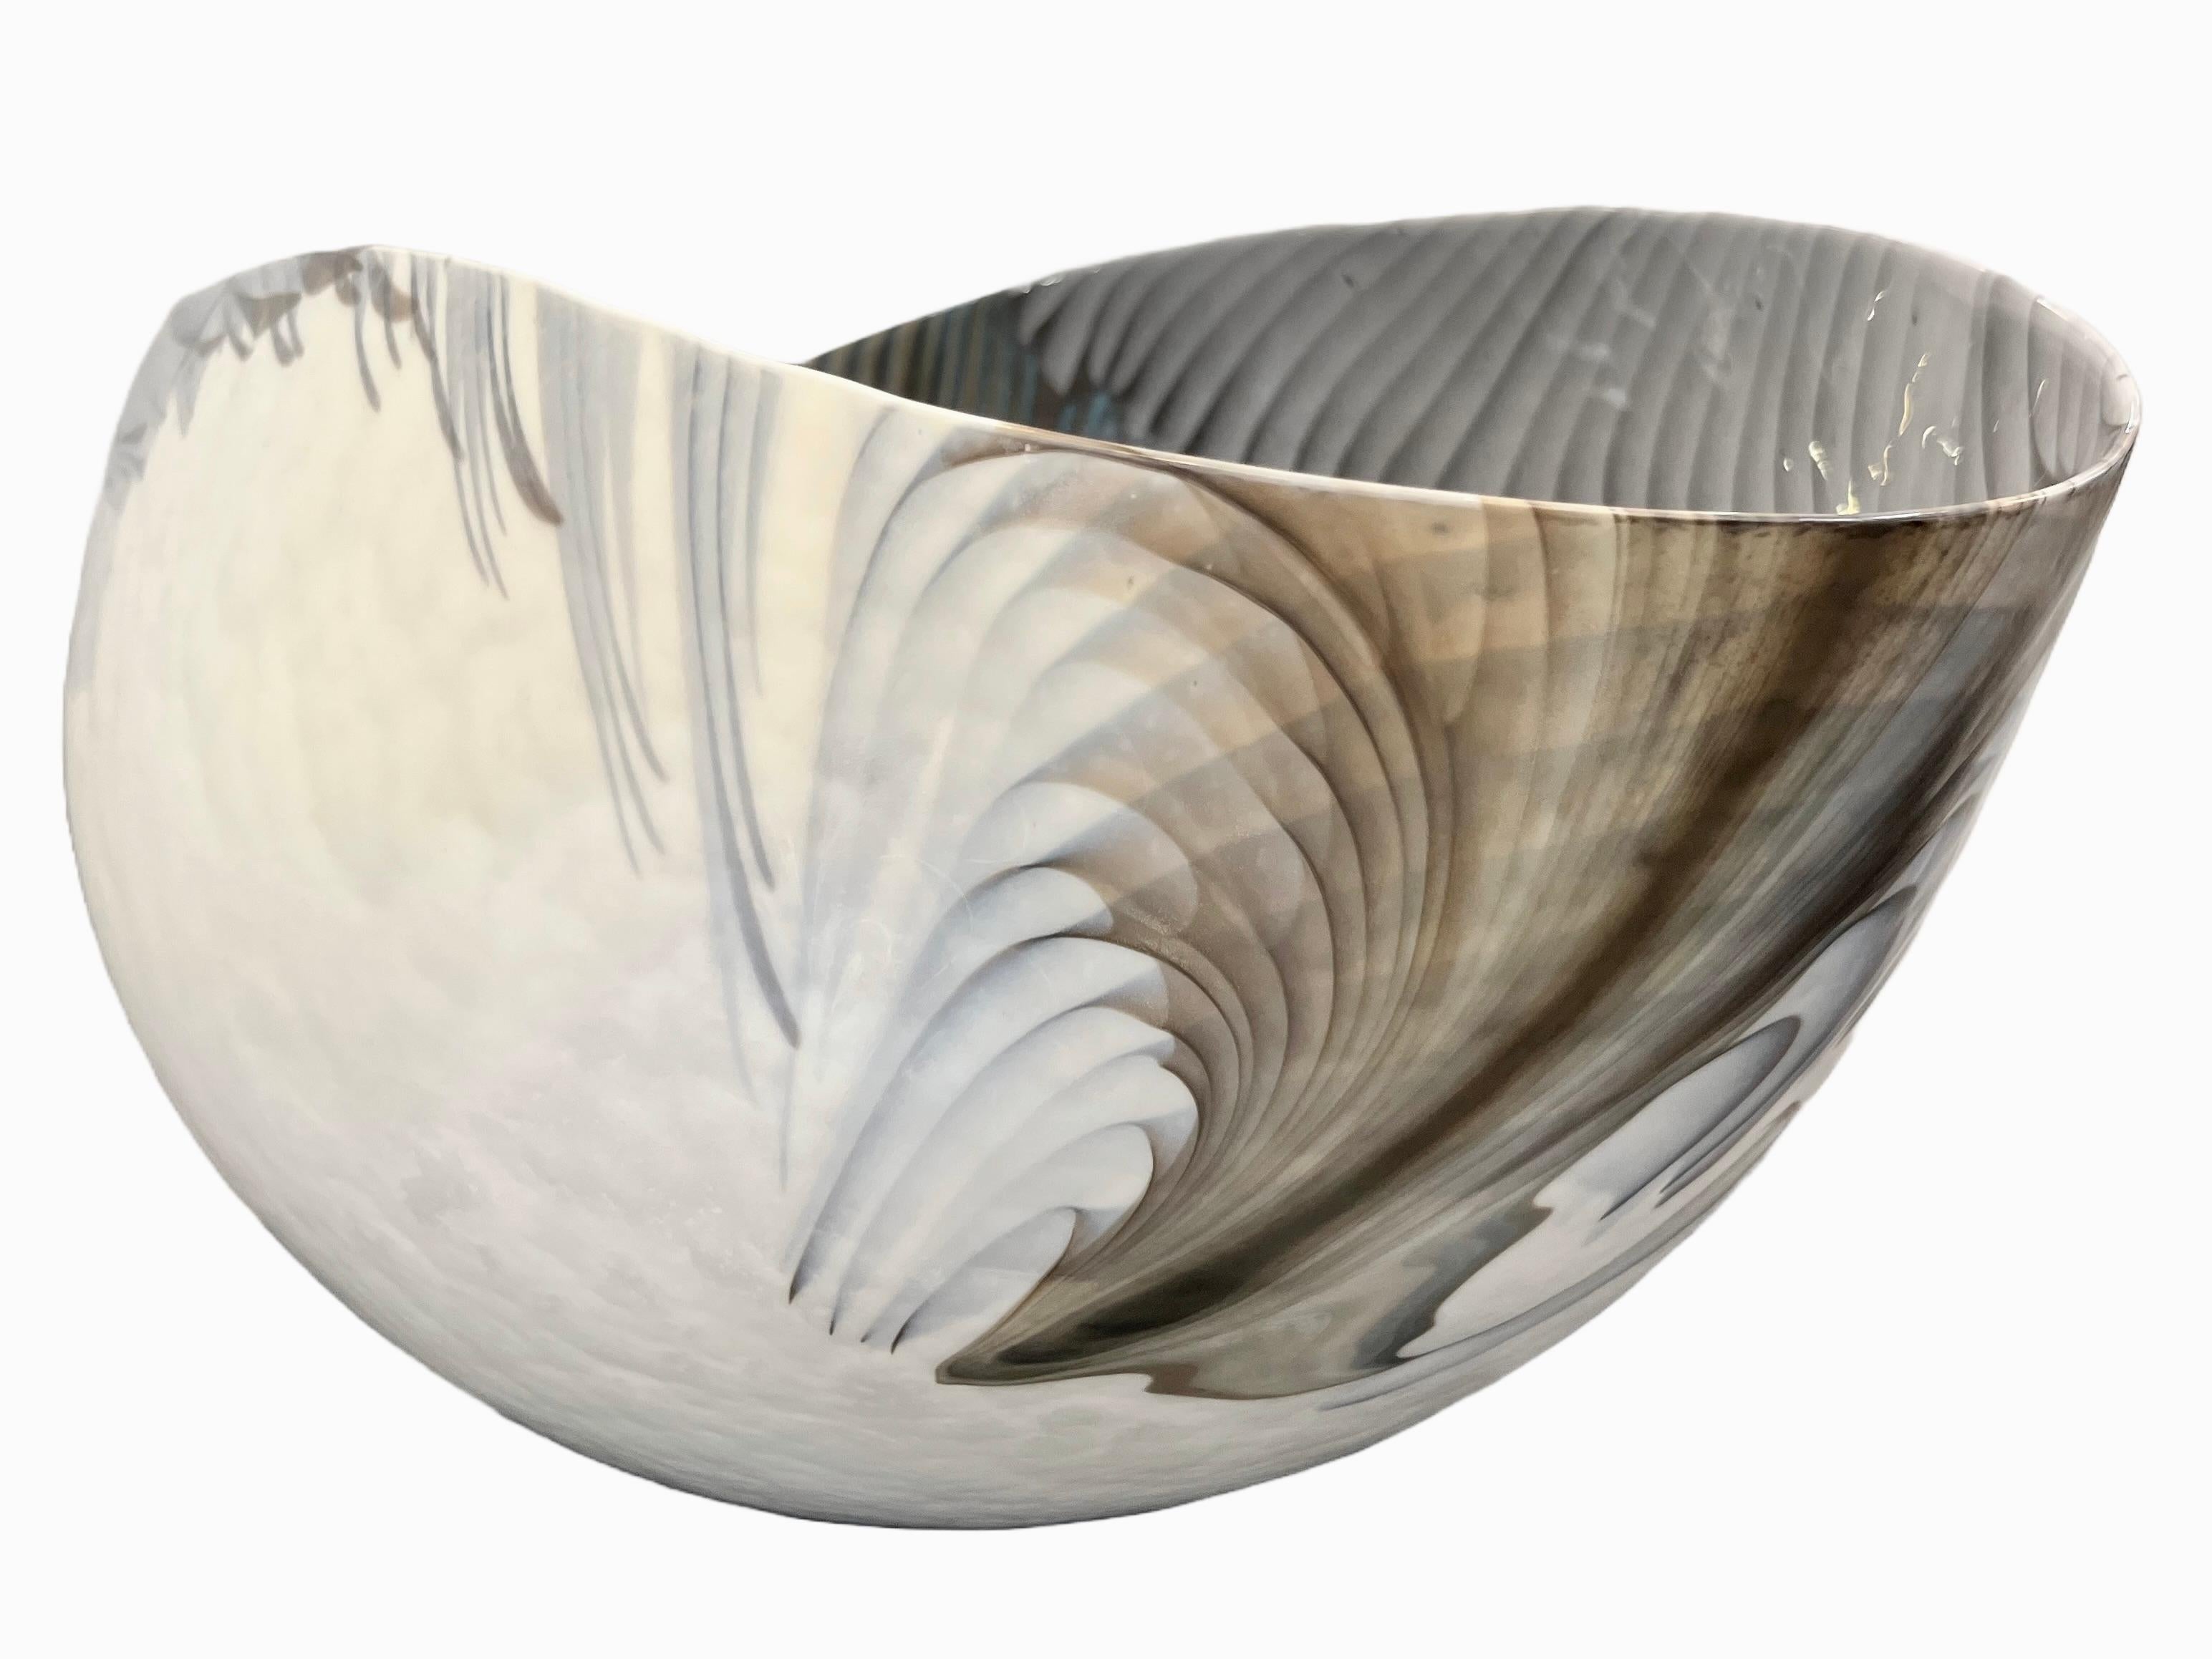 Exclusive very elegant Italian bowl, huge Venetian blown Murano glass modern centerpiece, with an unusual organic shape and a waved rim. The iridescent azure blue and ivory white Murano glass is decorated with a sophisticated blown bird feather